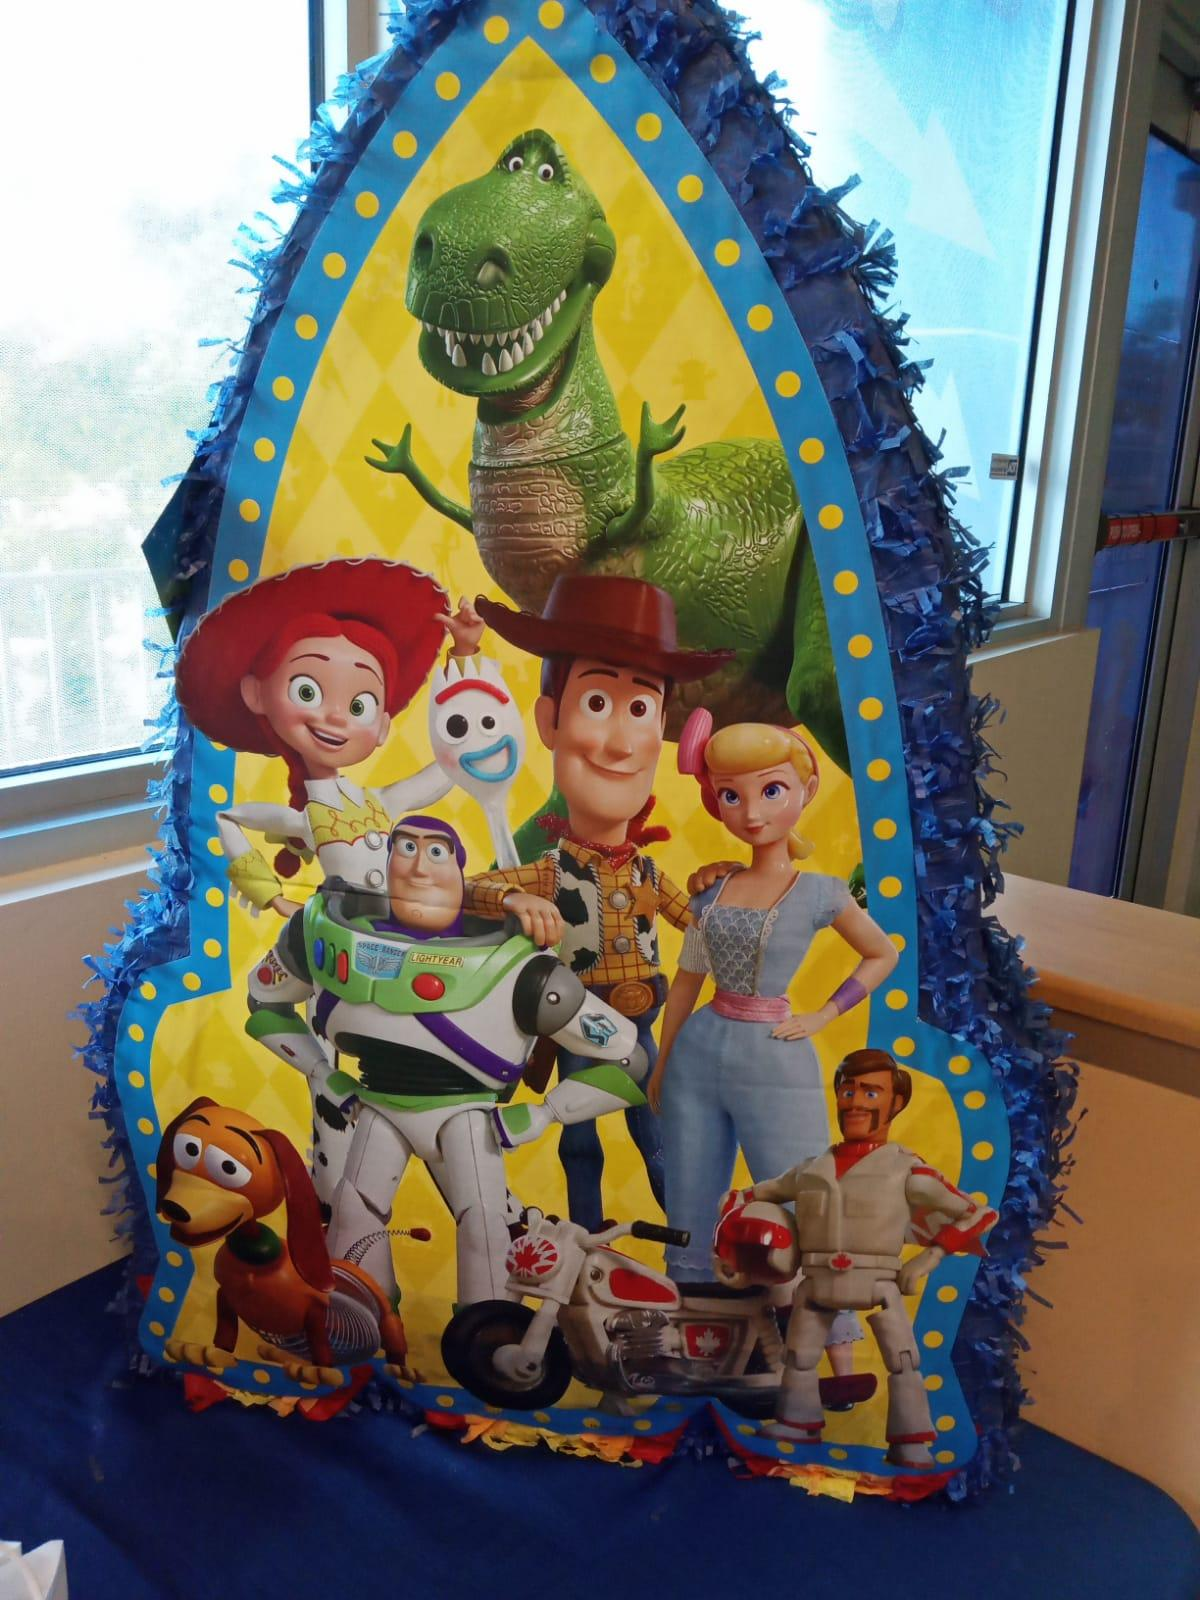 Décor in a birthday party based on the cartoon Toy Story’s theme